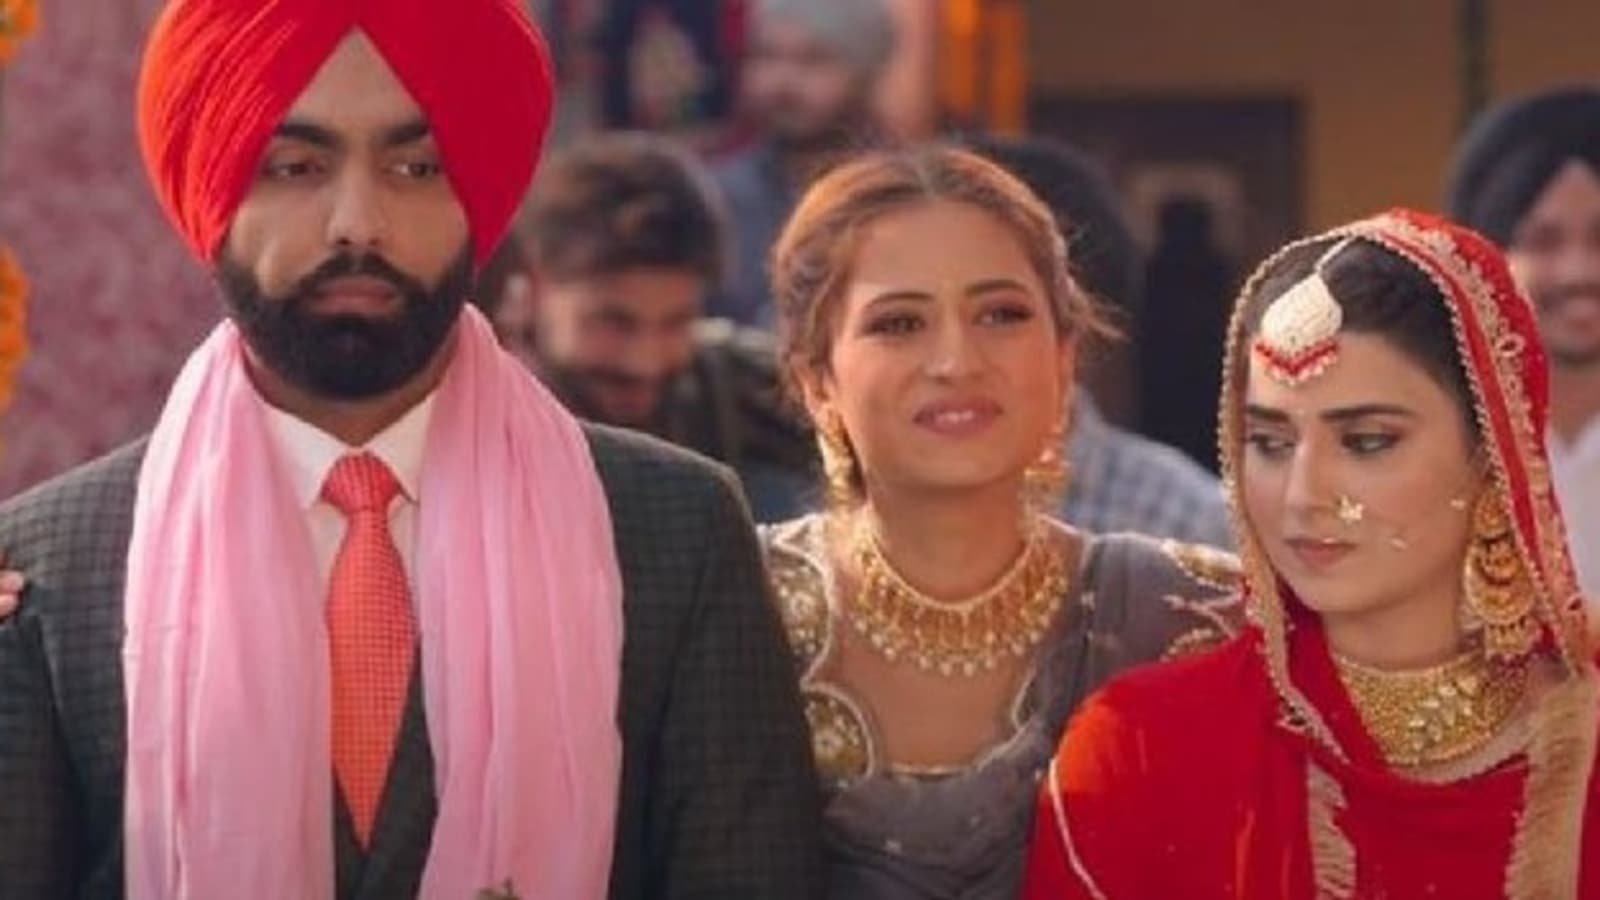 Saunkan Saunkne box office: Ammy Virk-starrer shatters all time records for Punjabi films on opening weekend